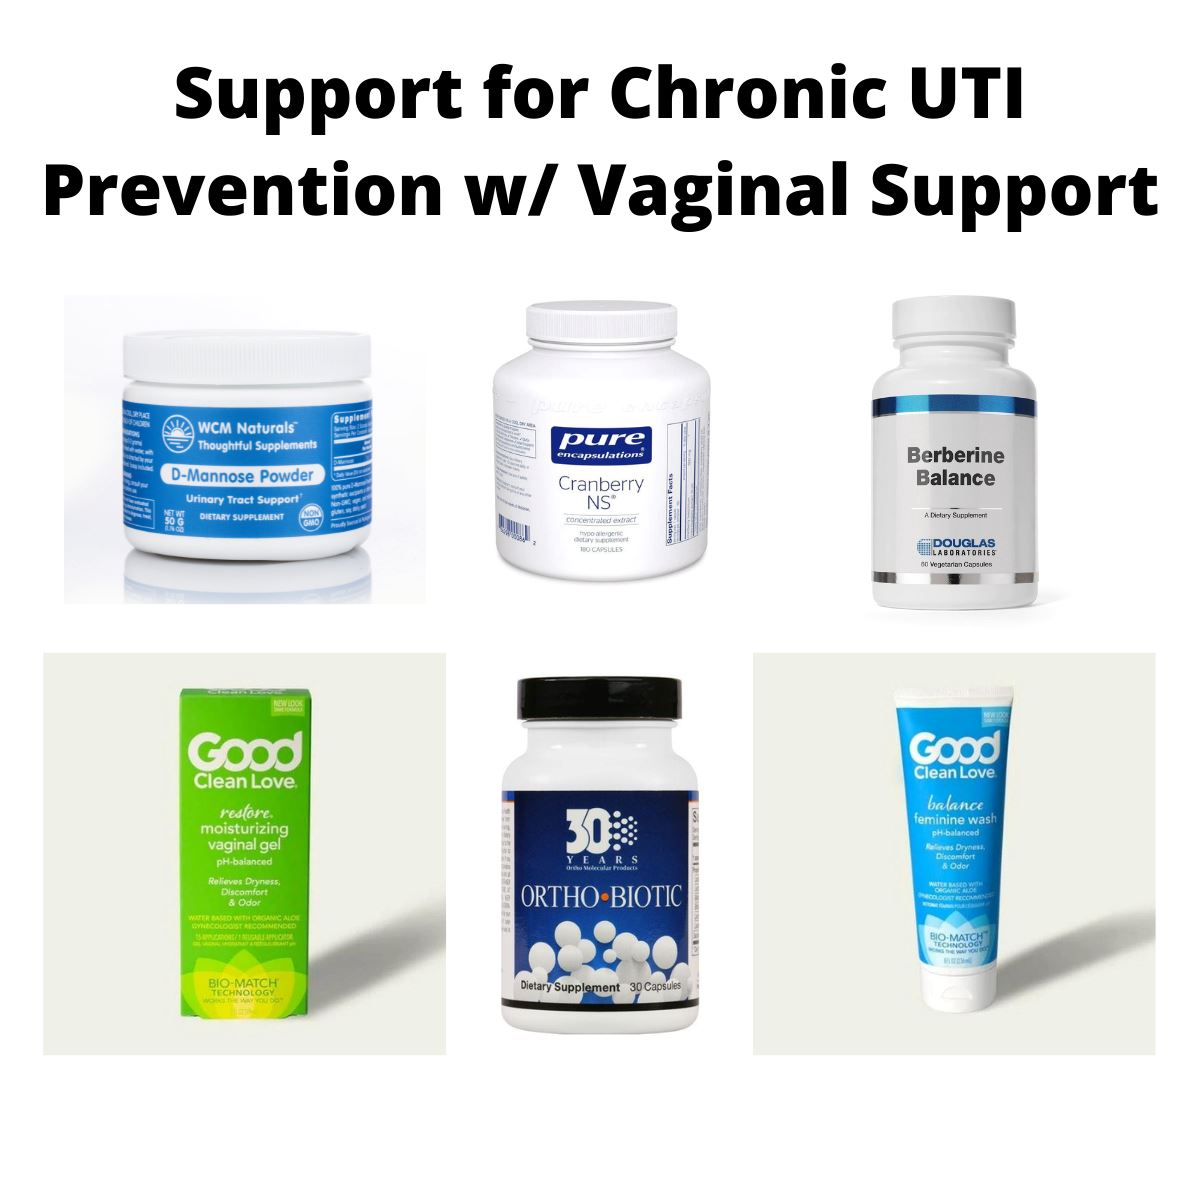 Support for Chronic UTI Prevention with Vaginal Support - 6 Items